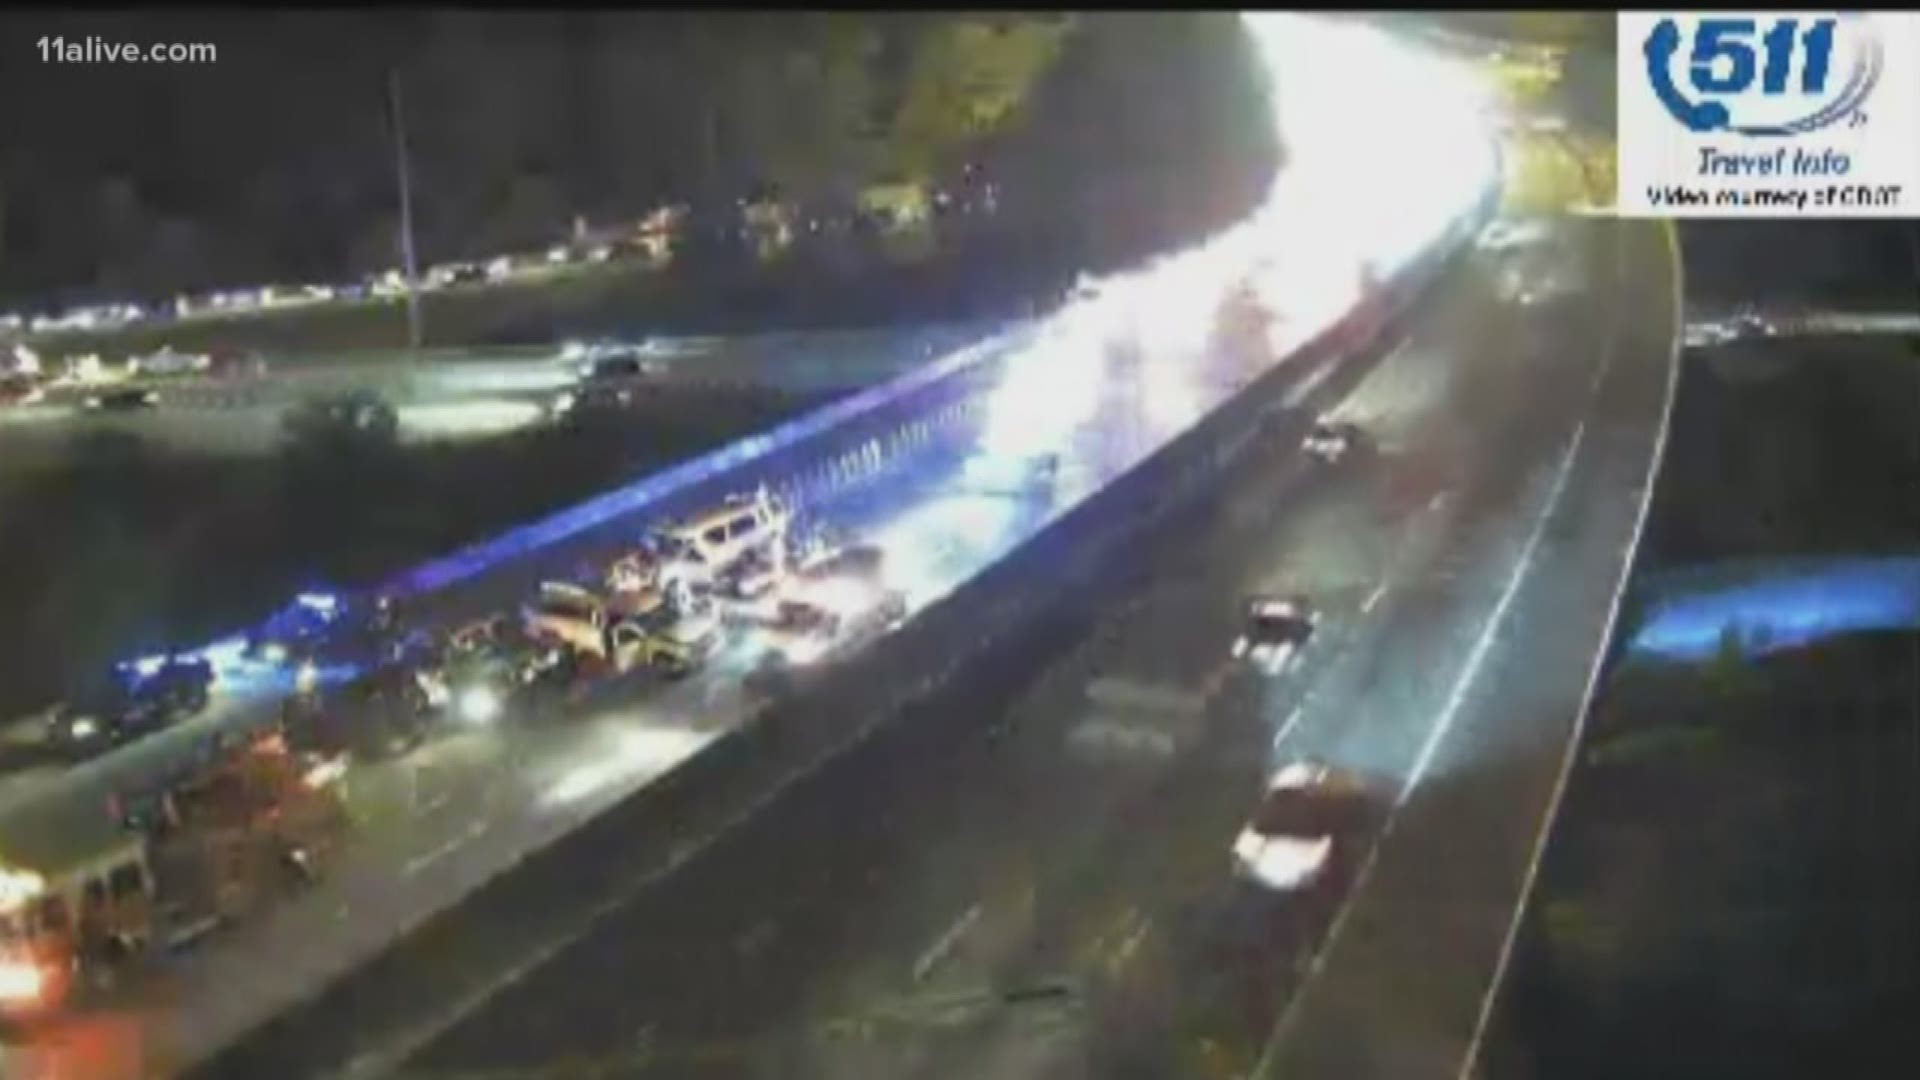 Authorities say roughly 20 people have been hospitalized, some with serious injuries, after a large multi-vehicle crash on I-20 near I-285 late Saturday night.